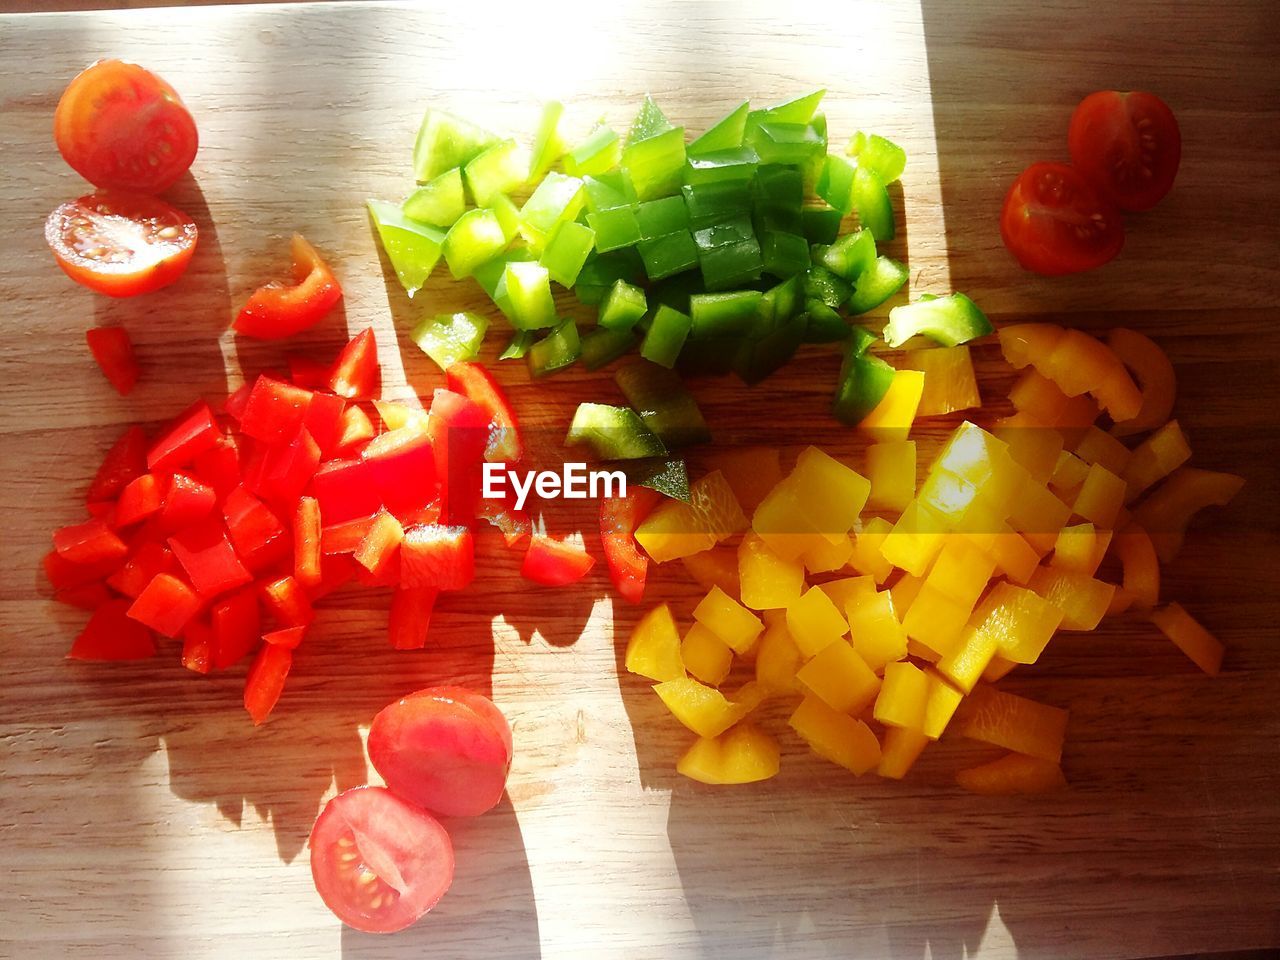 CLOSE-UP OF CHOPPED VEGETABLES IN CONTAINER